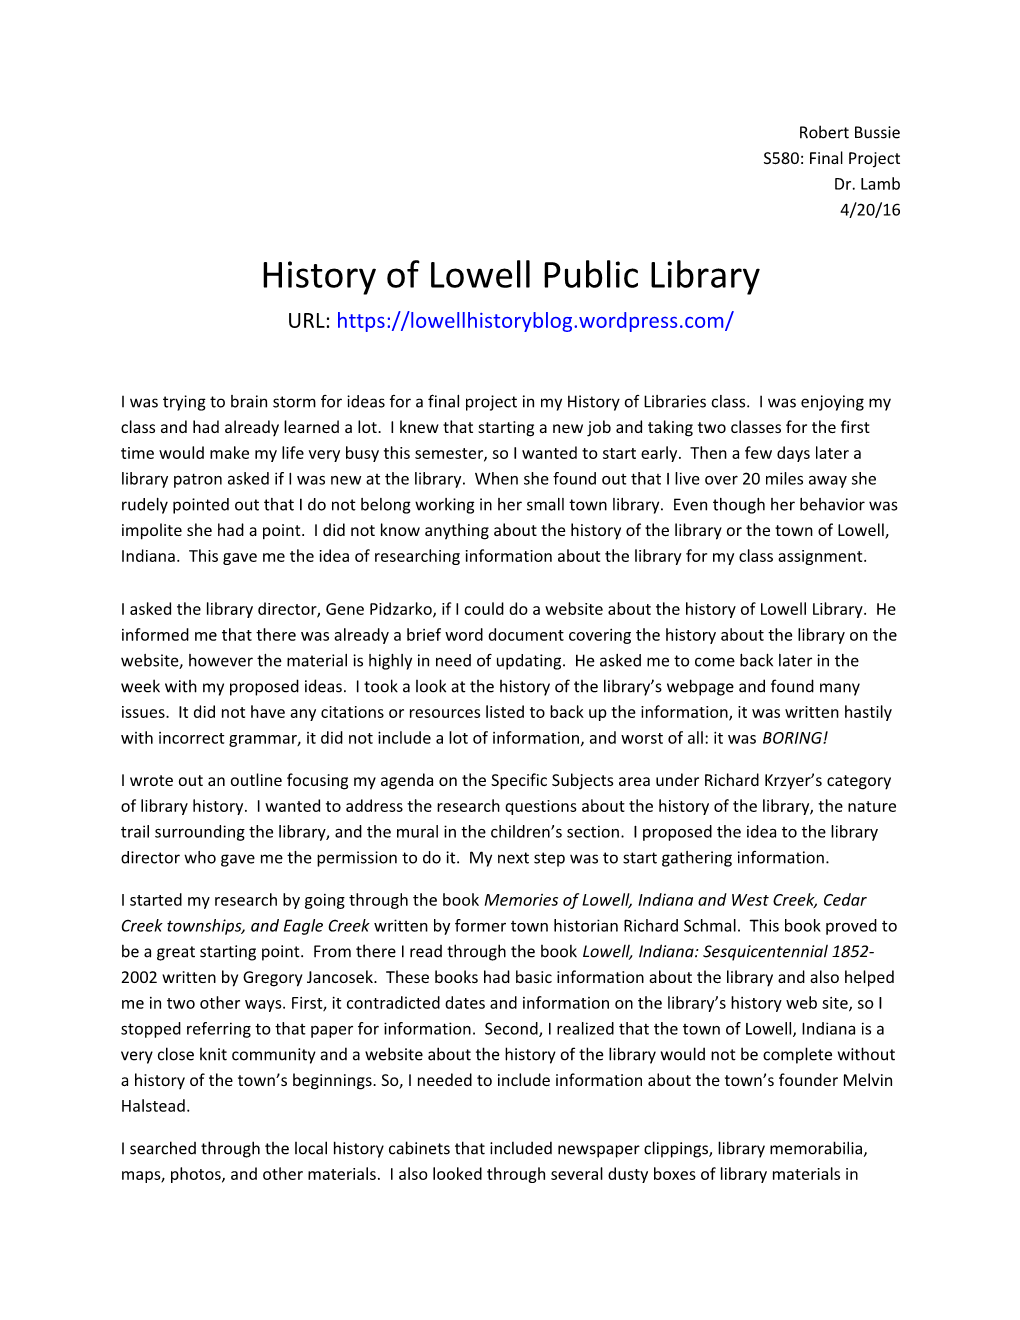 History of Lowell Public Library